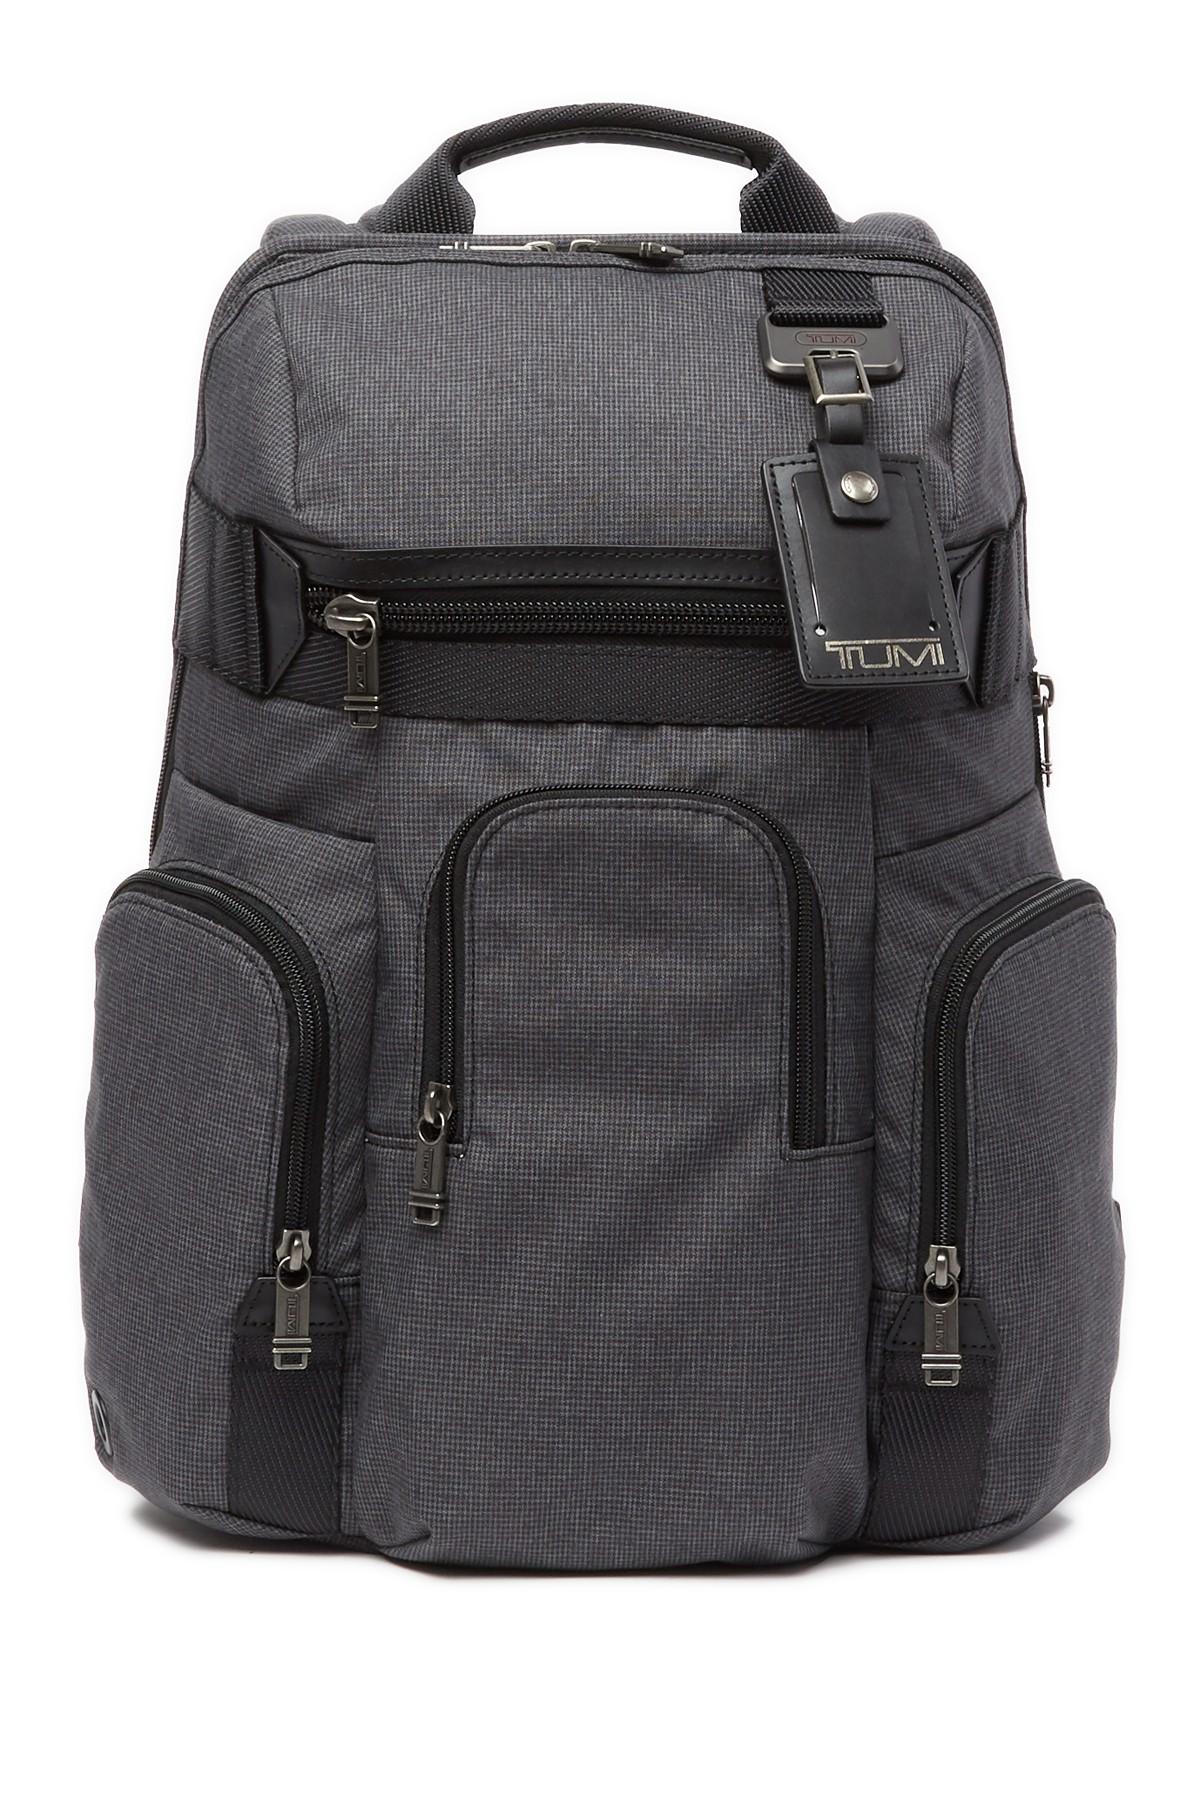 Tumi Leather Nickerson 3 Pocket Expansion Backpack in Gray for Men - Lyst